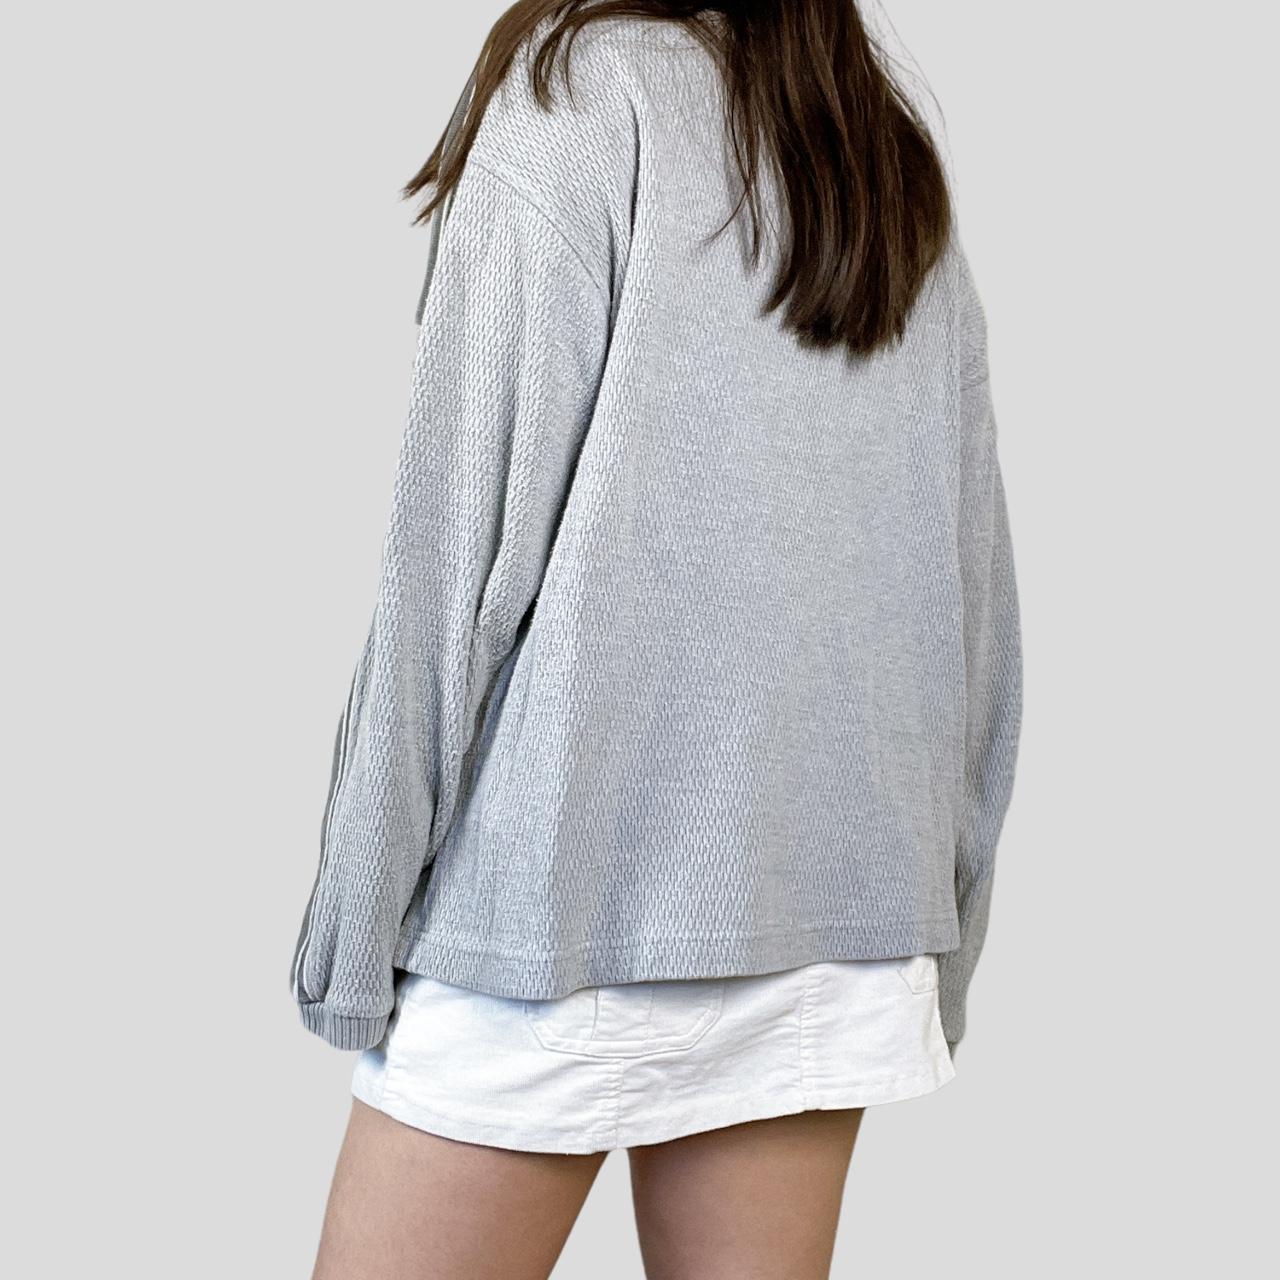 Product Image 4 - Preppy skater oversized sweater in